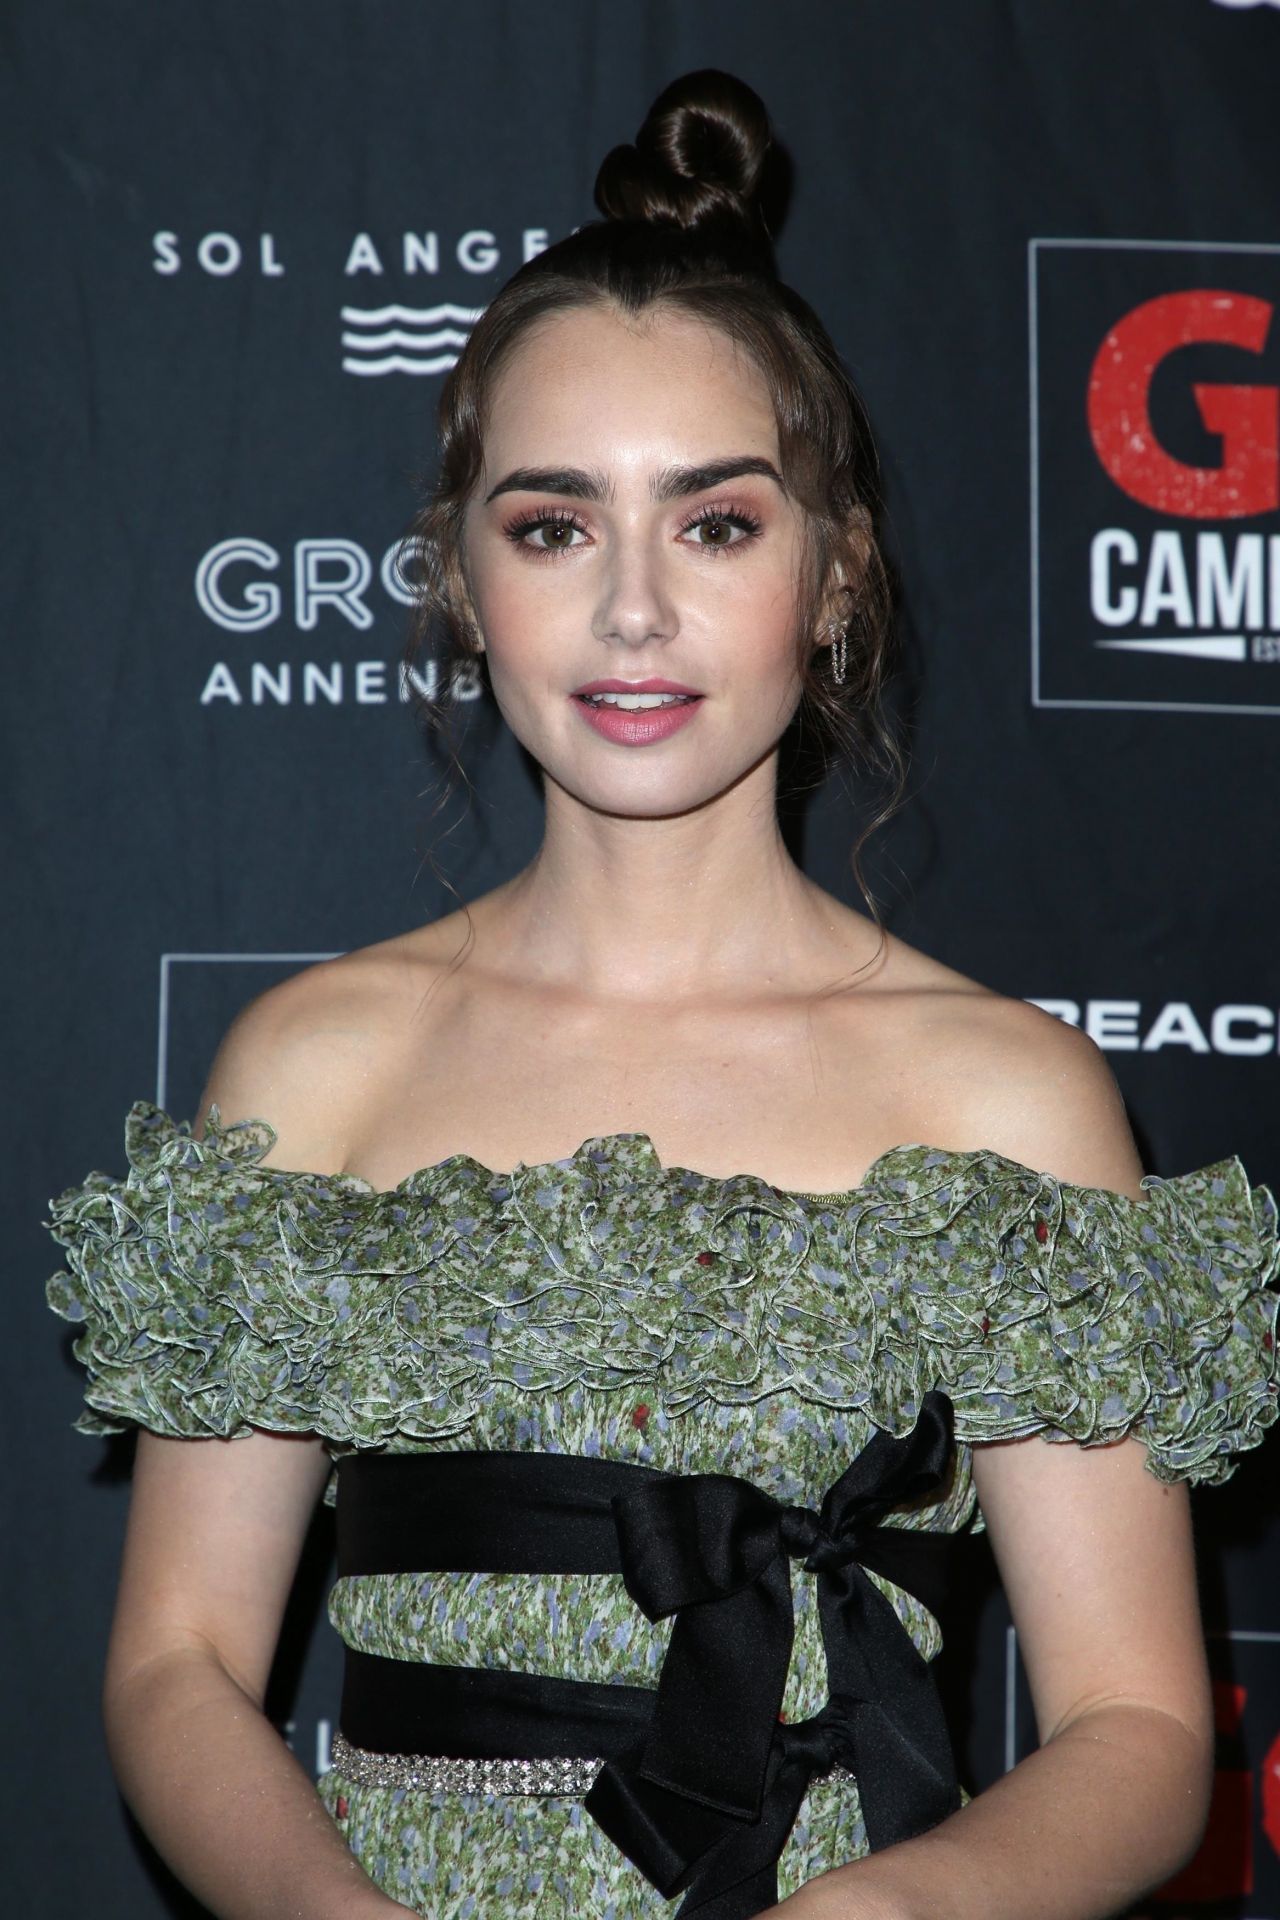 lily-collins-go-campaign-gala-in-los-angeles-10-20-2018-12.jpg